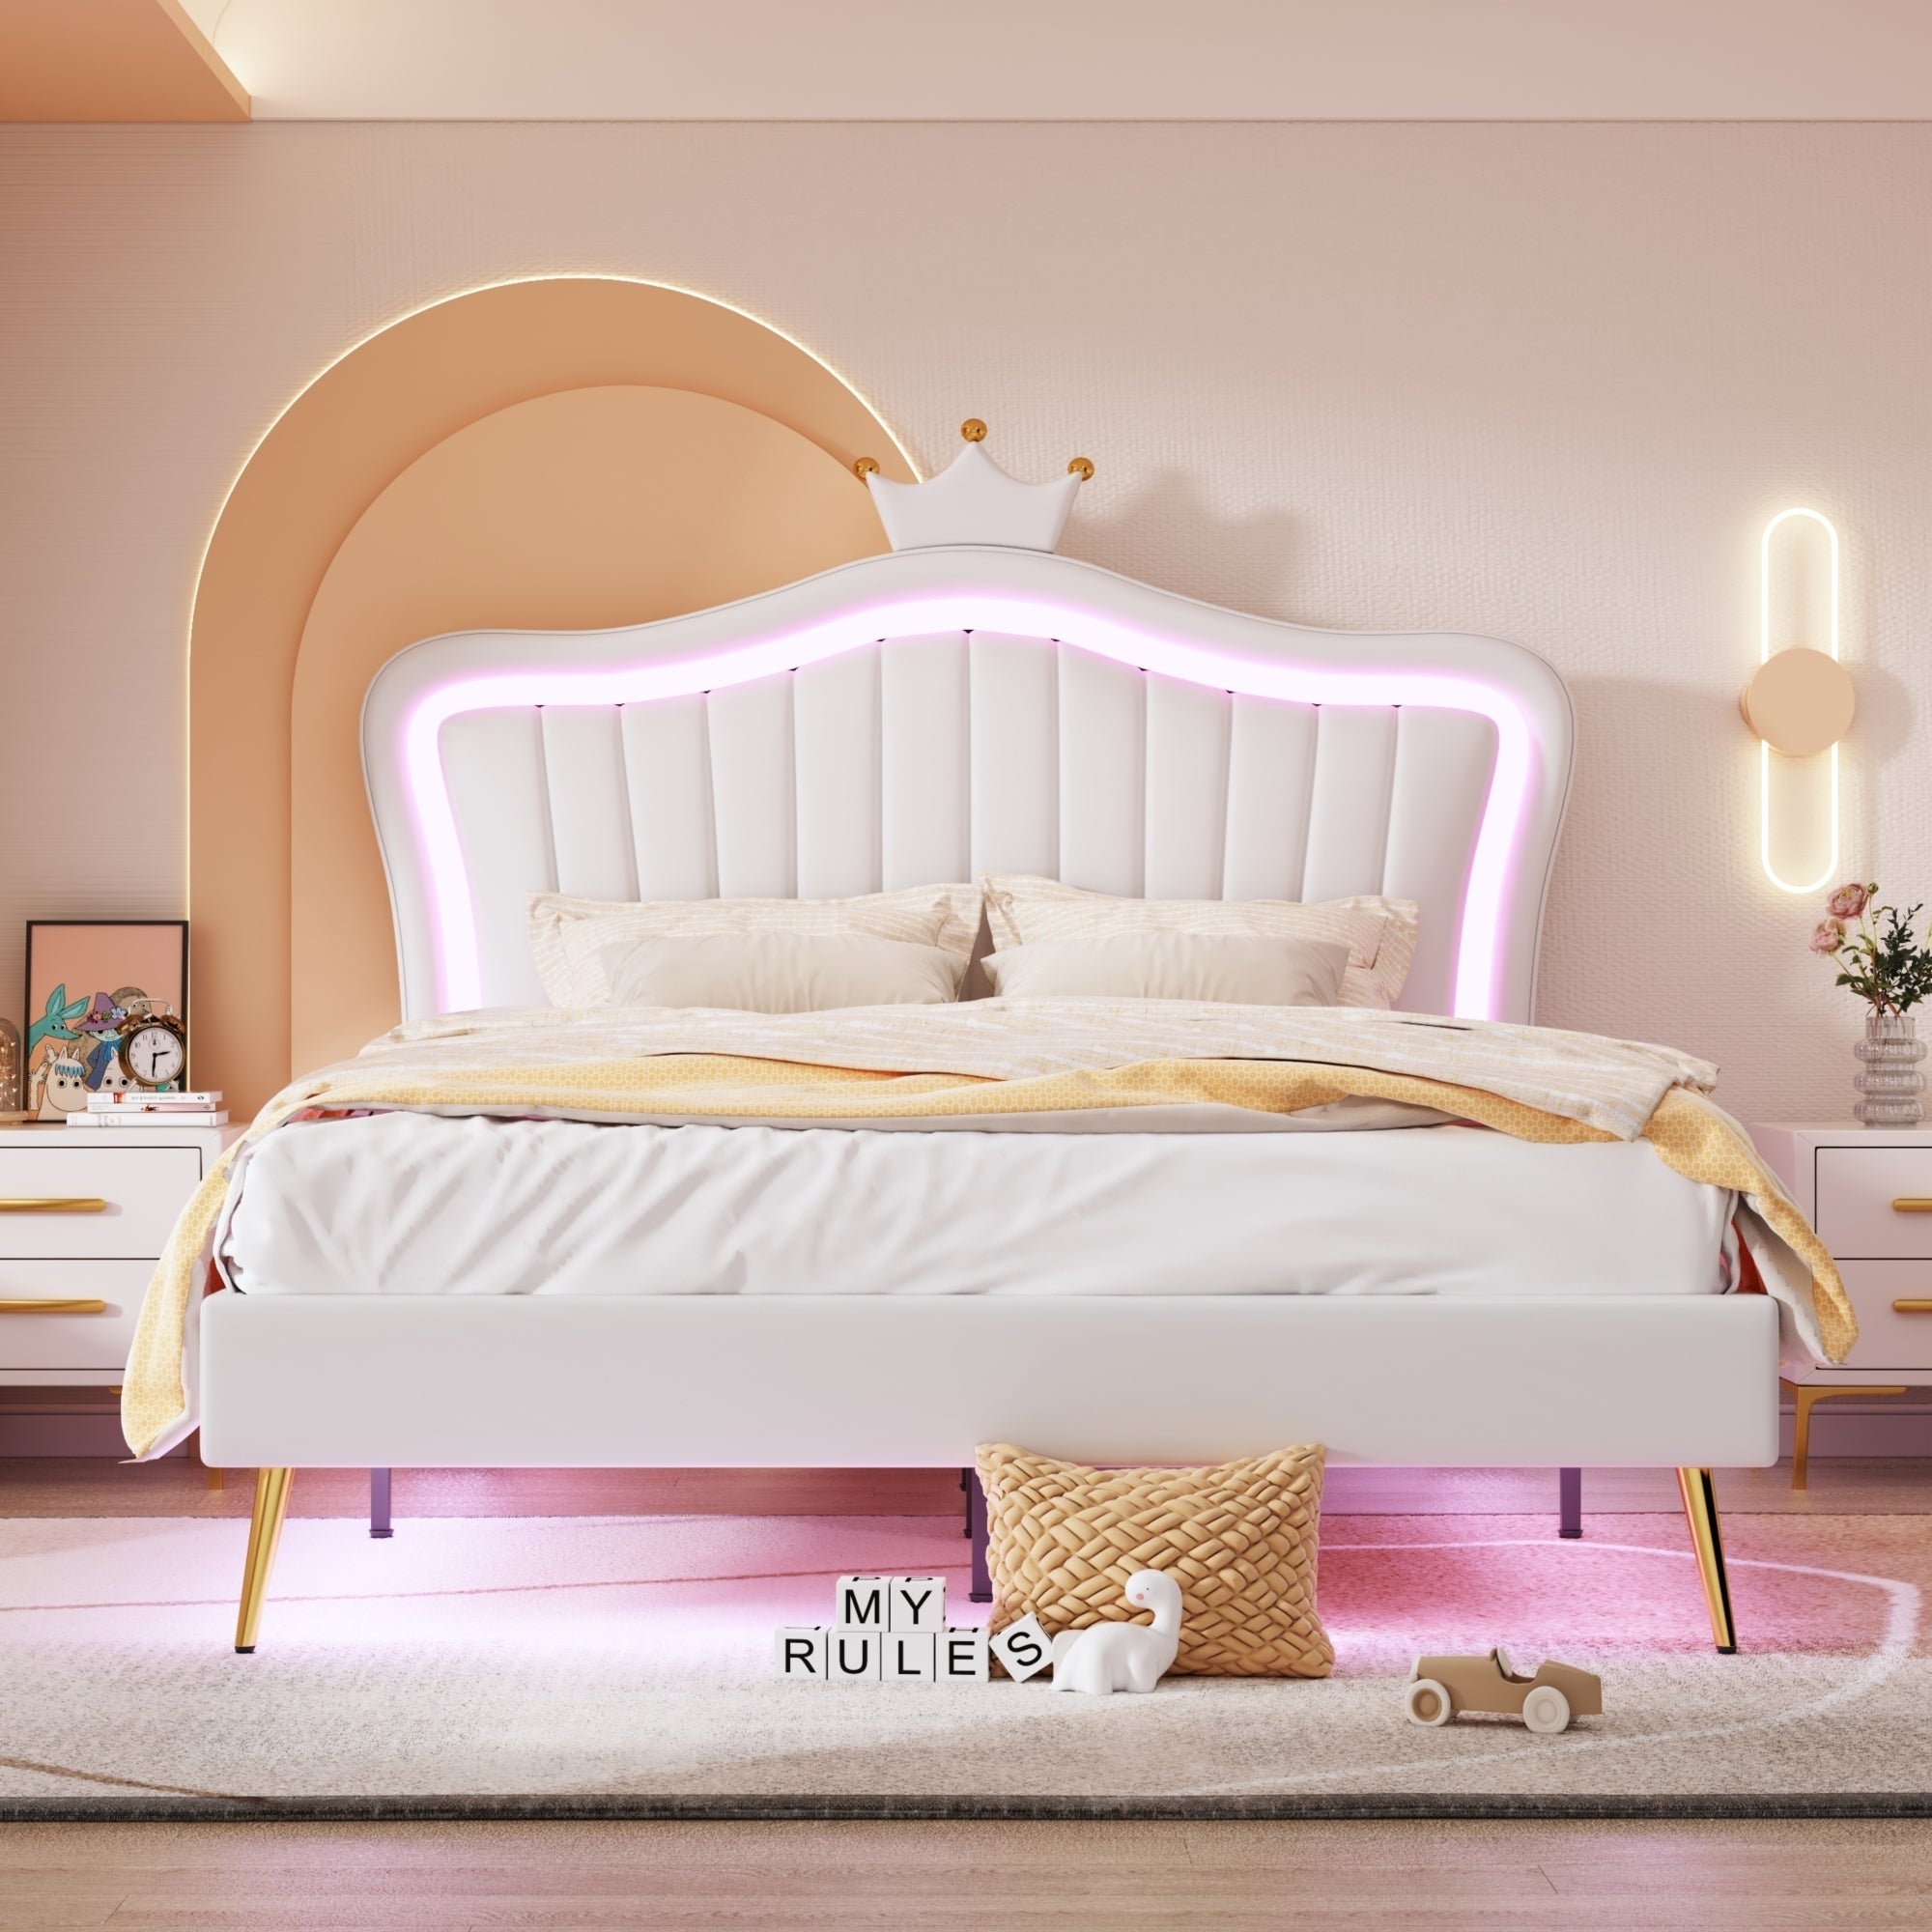 Queen Size Upholstered Bed Frame with LED Lights, Modern Upholstered Princess Bed With Crown Headboard